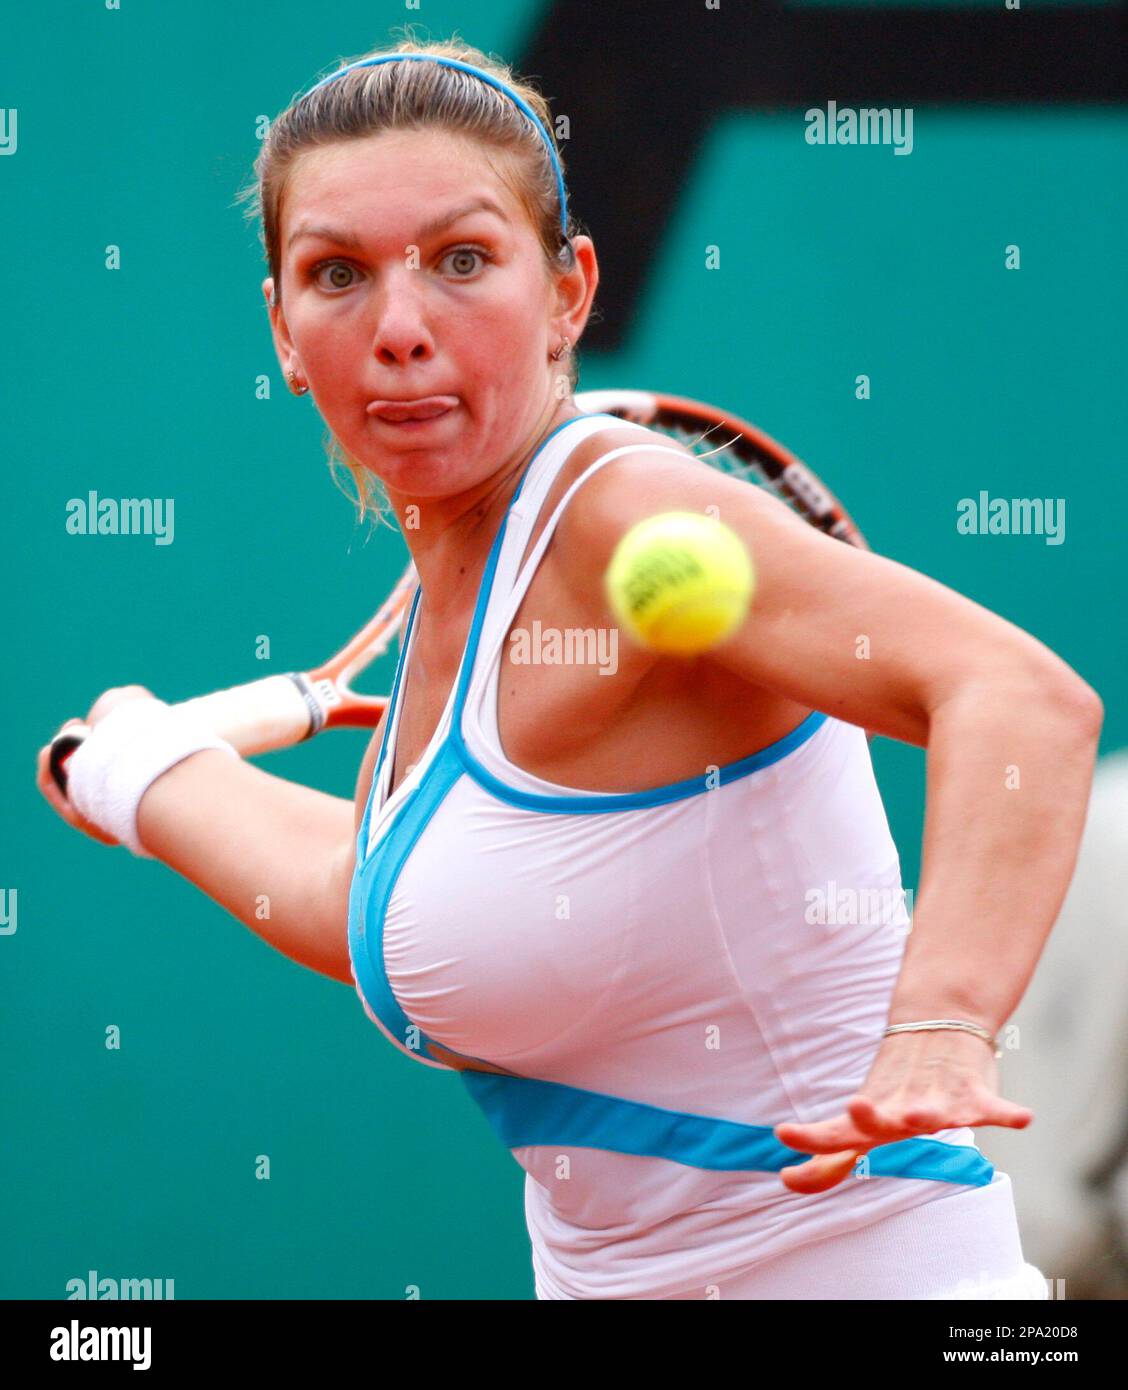 Romania's Simona Halep returns the ball to compatriot during the Grils' single final match of the French Open tennis tournament, Sunday, June 8, 2008 at the Roland Garros stadium in Paris. (AP Photo/Laurent Baheux) Stock Photo